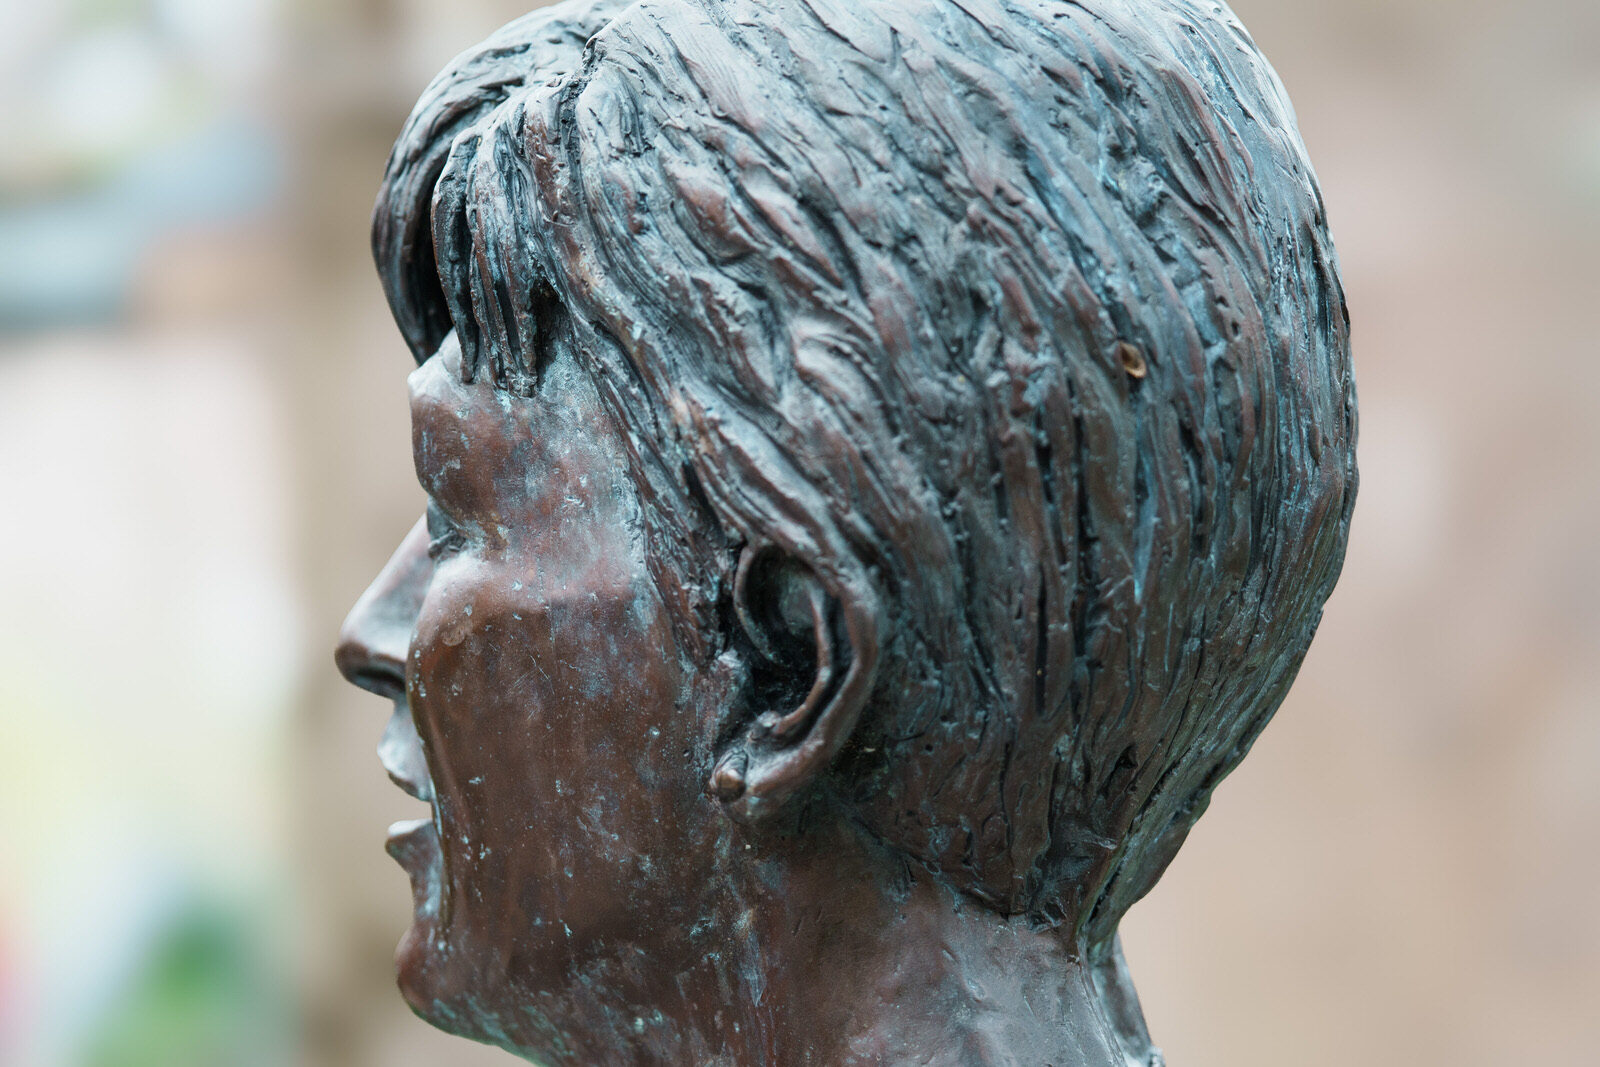 VERONICA GUERIN MEMORIAL [I USE THIS SCULPTURE AT DUBLIN CASTLE AS A REFERENCE]-229867-1